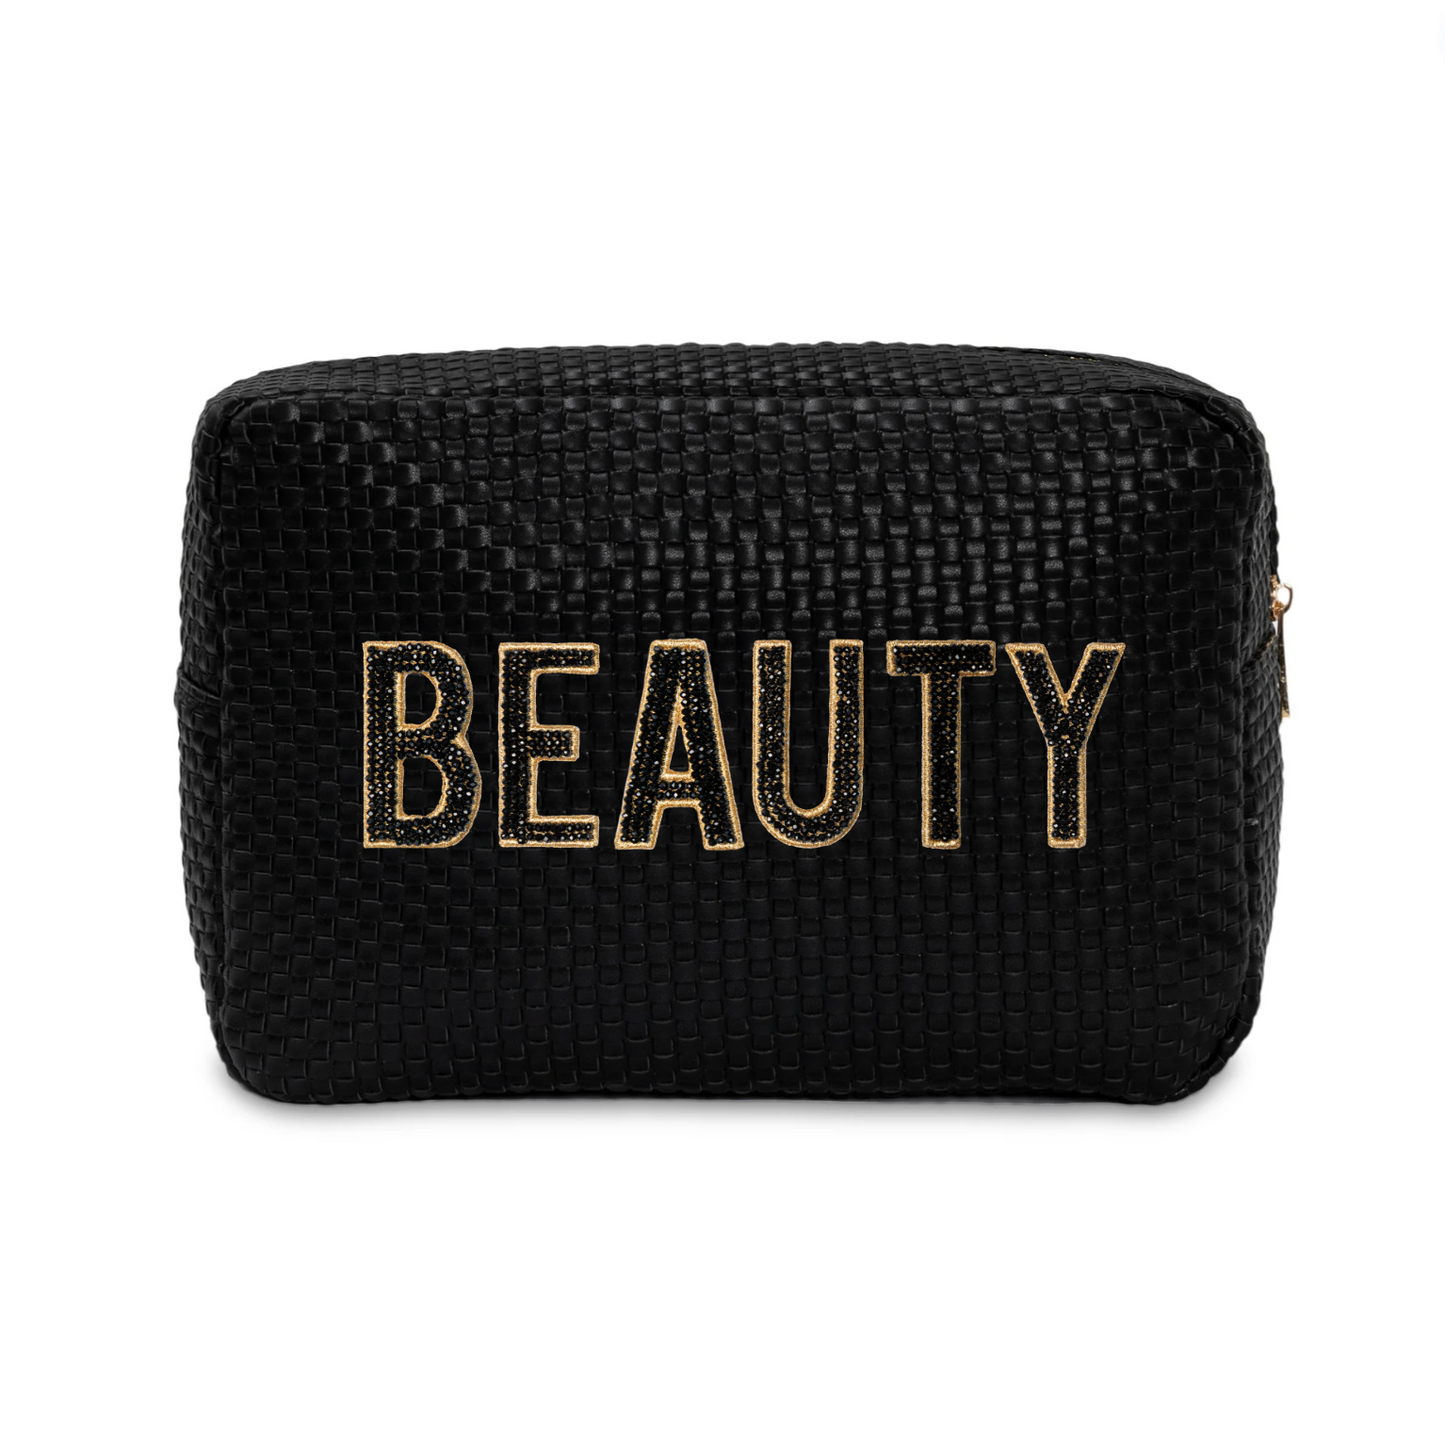 Beauty Big Pouch | Travel